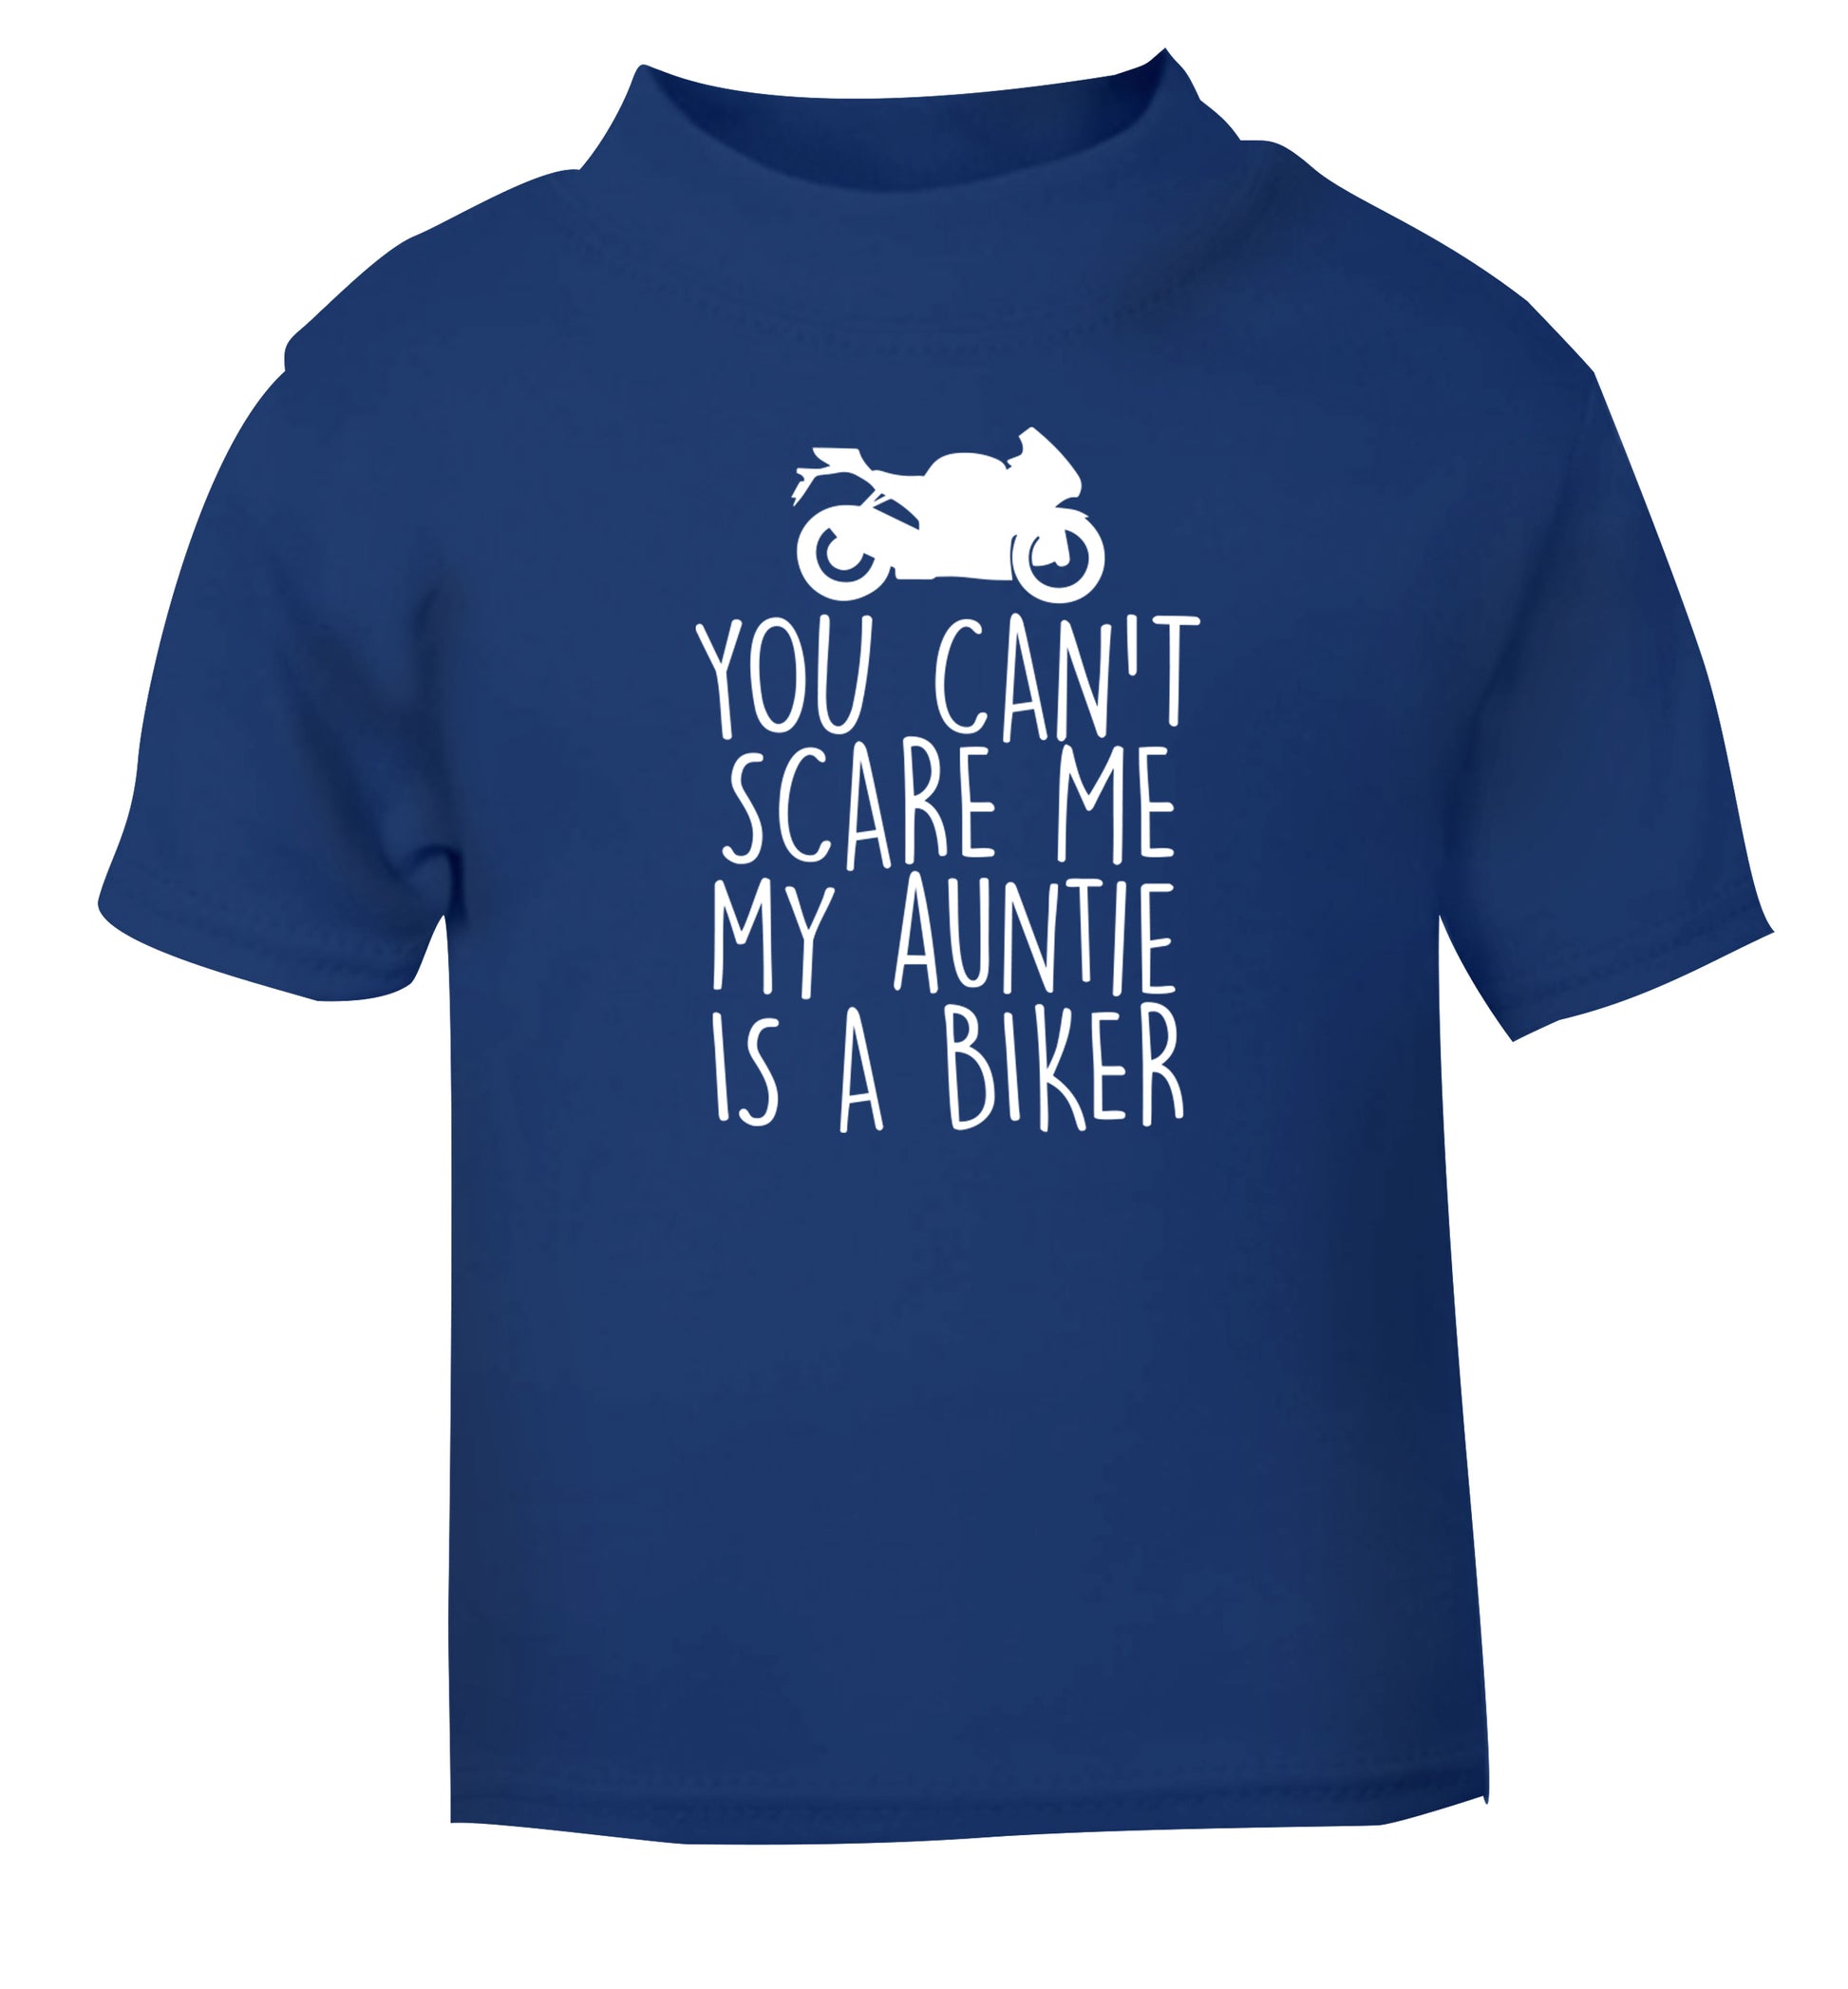 You can't scare me my auntie is a biker blue Baby Toddler Tshirt 2 Years